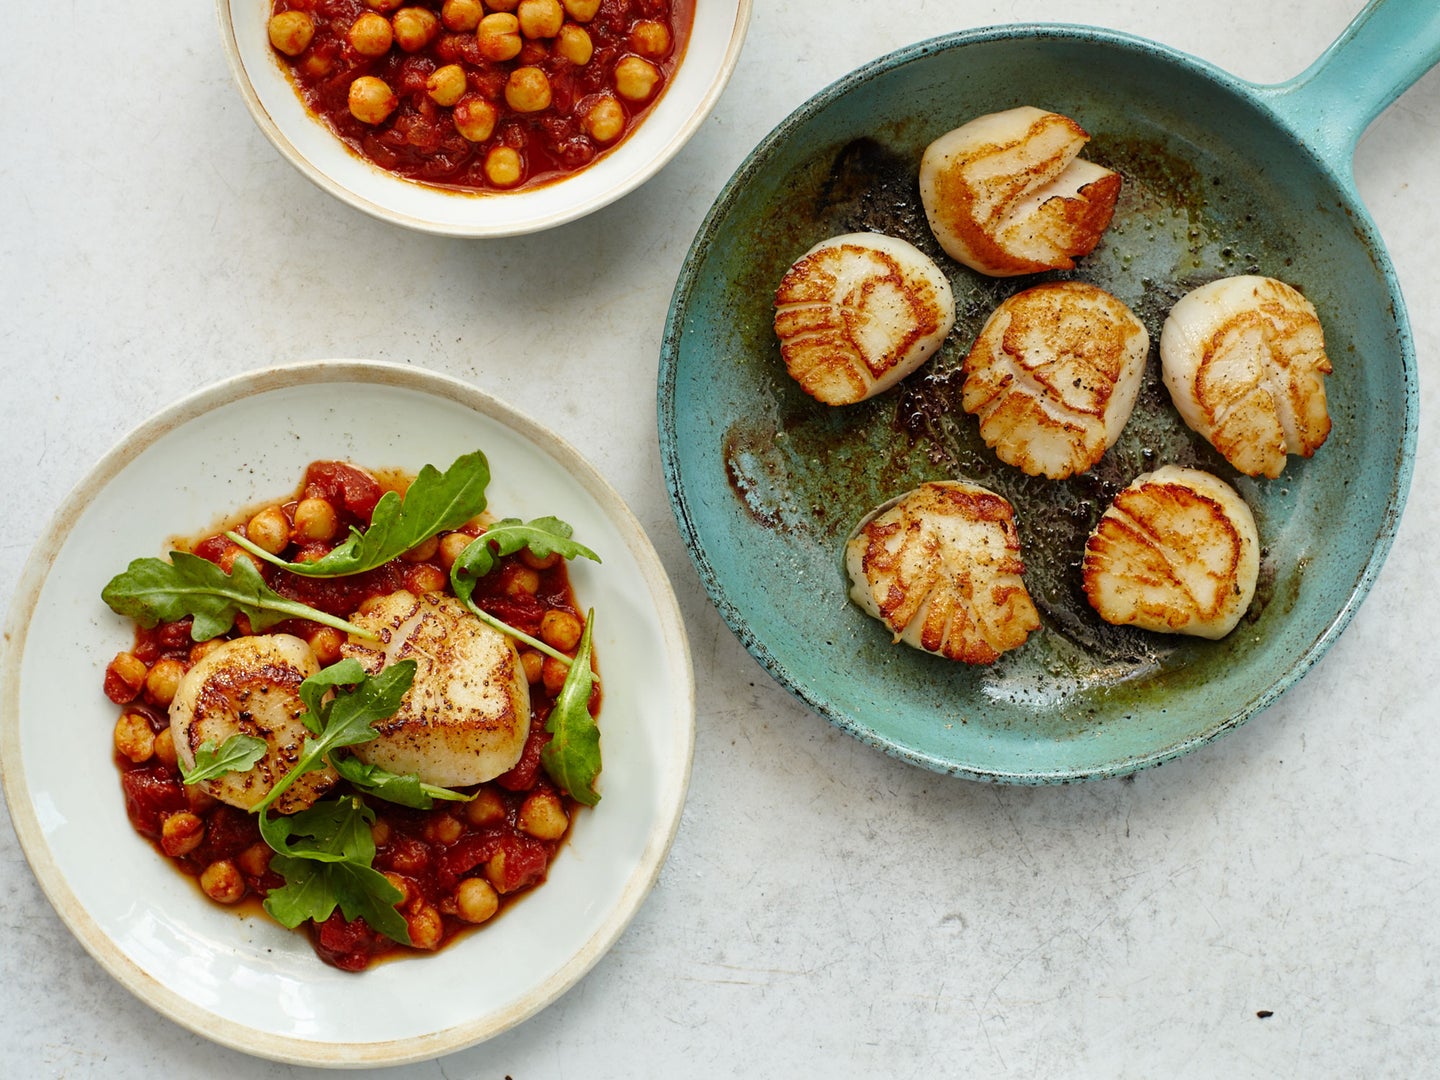 Scallops with Stewed Chickpeas and Tomatoes